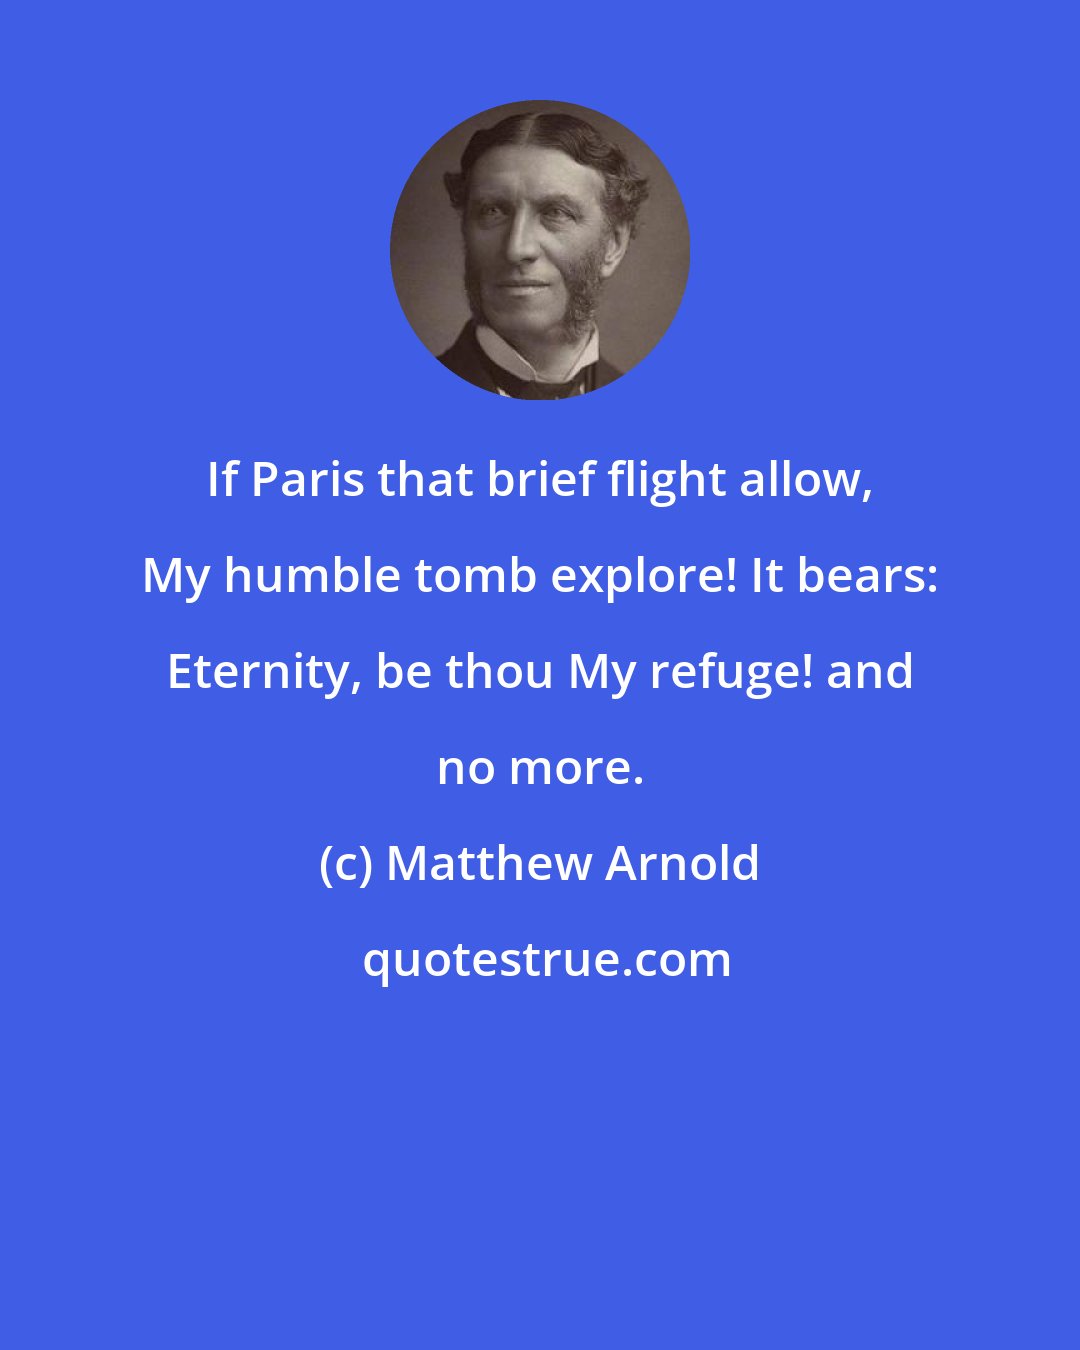 Matthew Arnold: If Paris that brief flight allow, My humble tomb explore! It bears: Eternity, be thou My refuge! and no more.